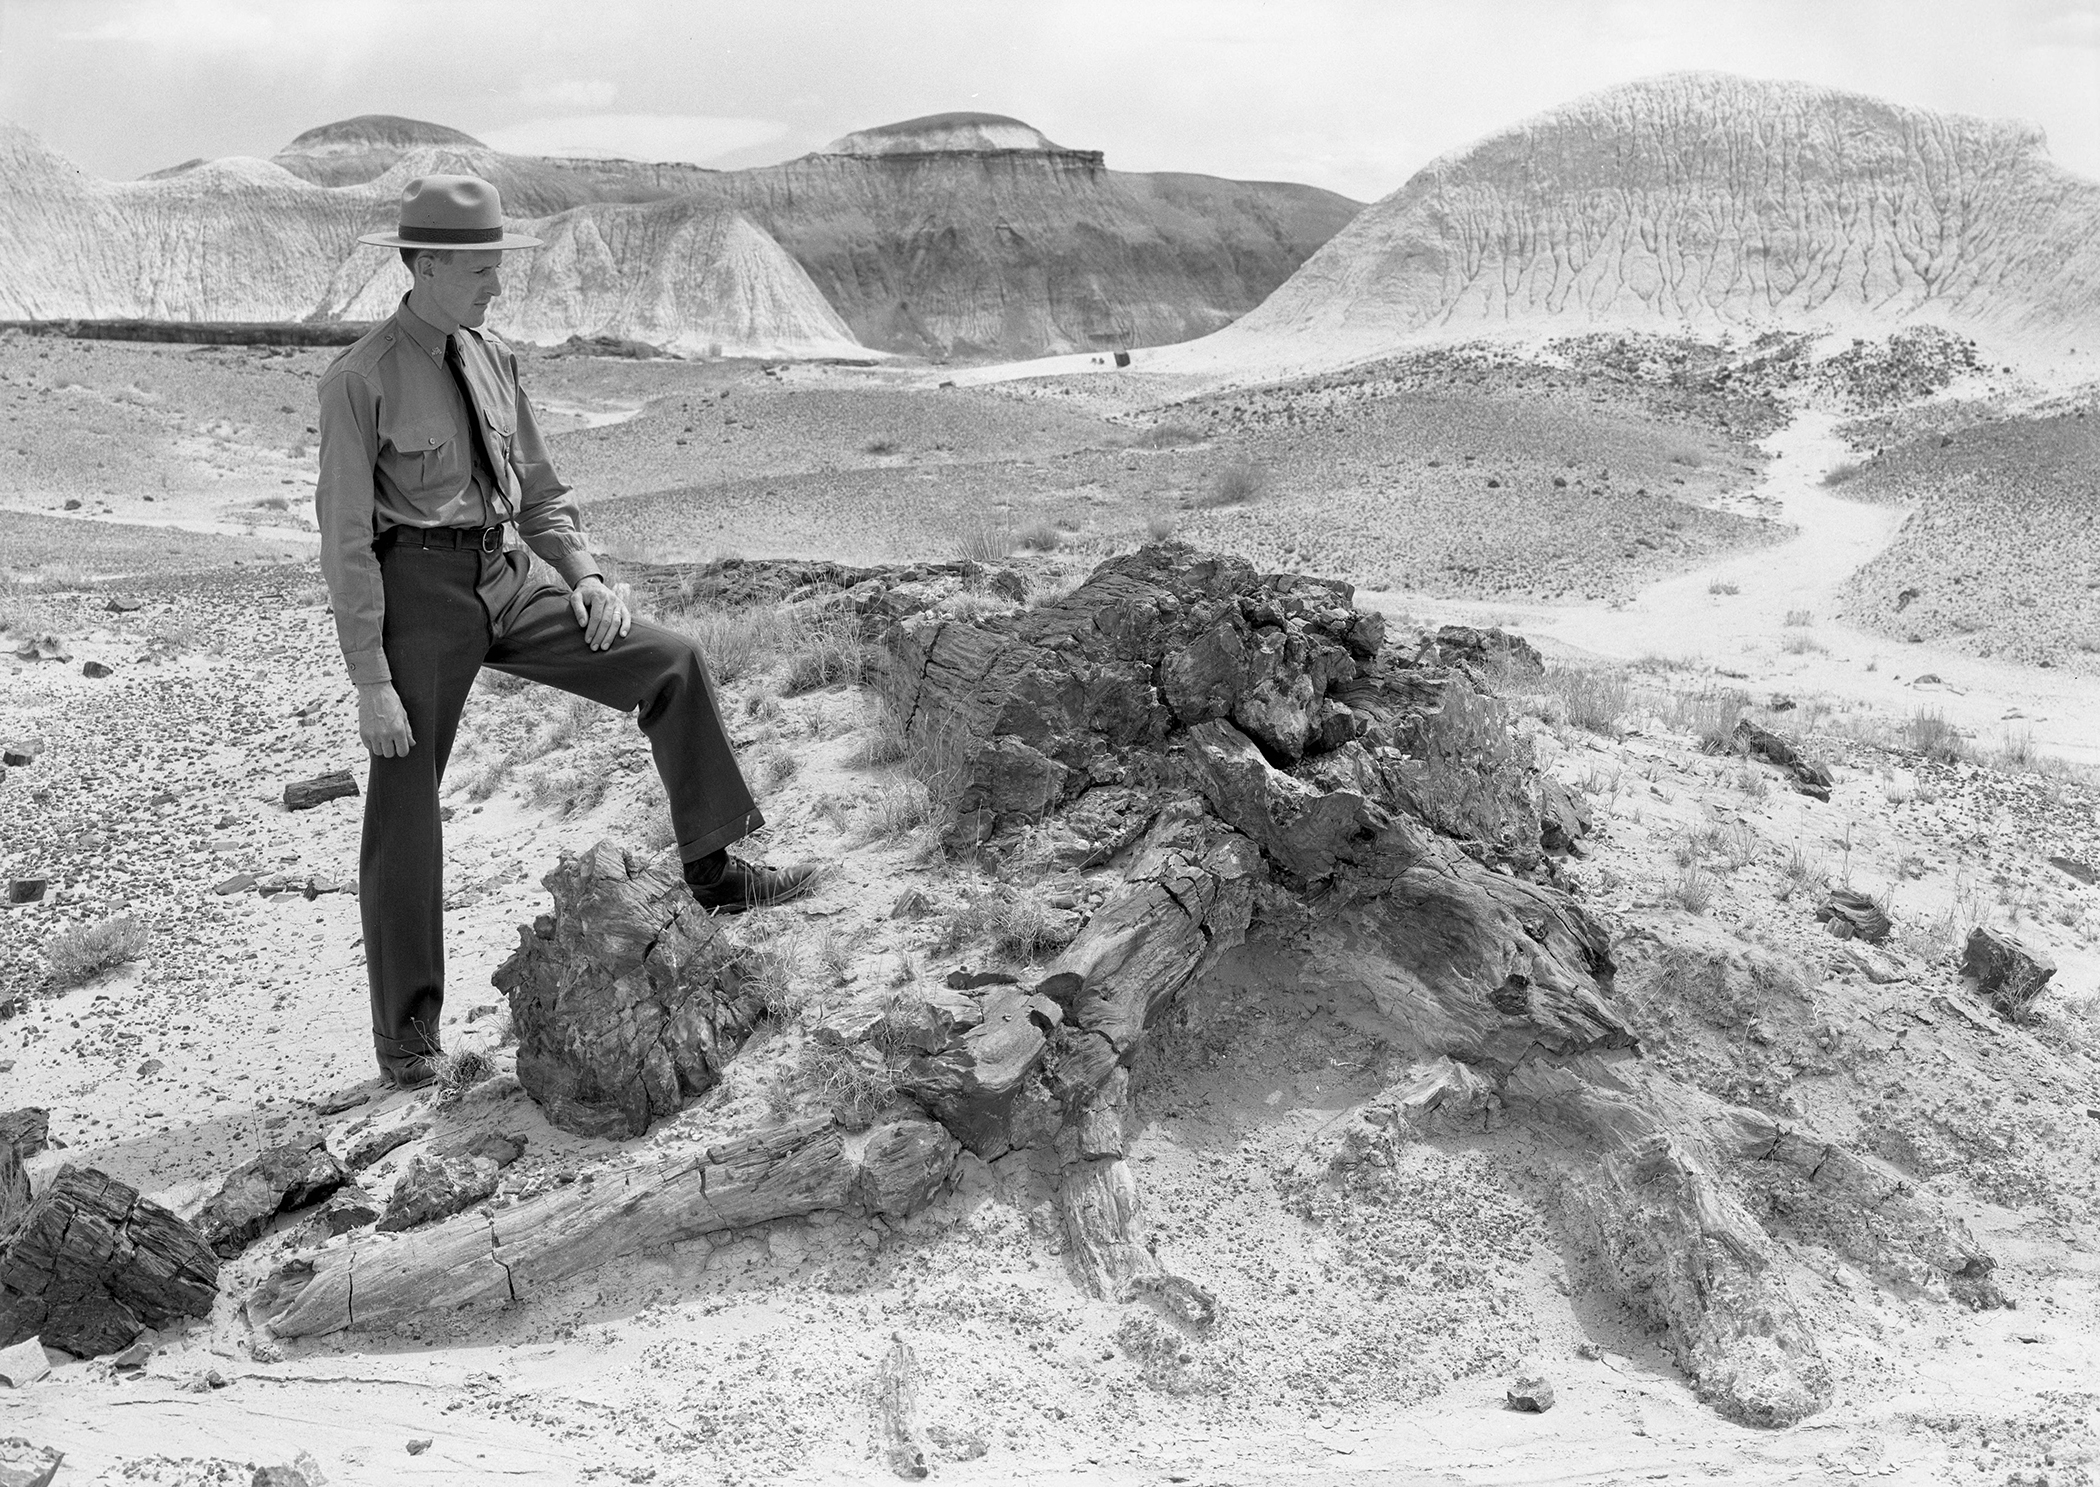 Man in NPS uniform poses on an incline at the base of a fallen petrified tree. One foot is higher on the incline; he rests his hand on that log and looks down at the tree.